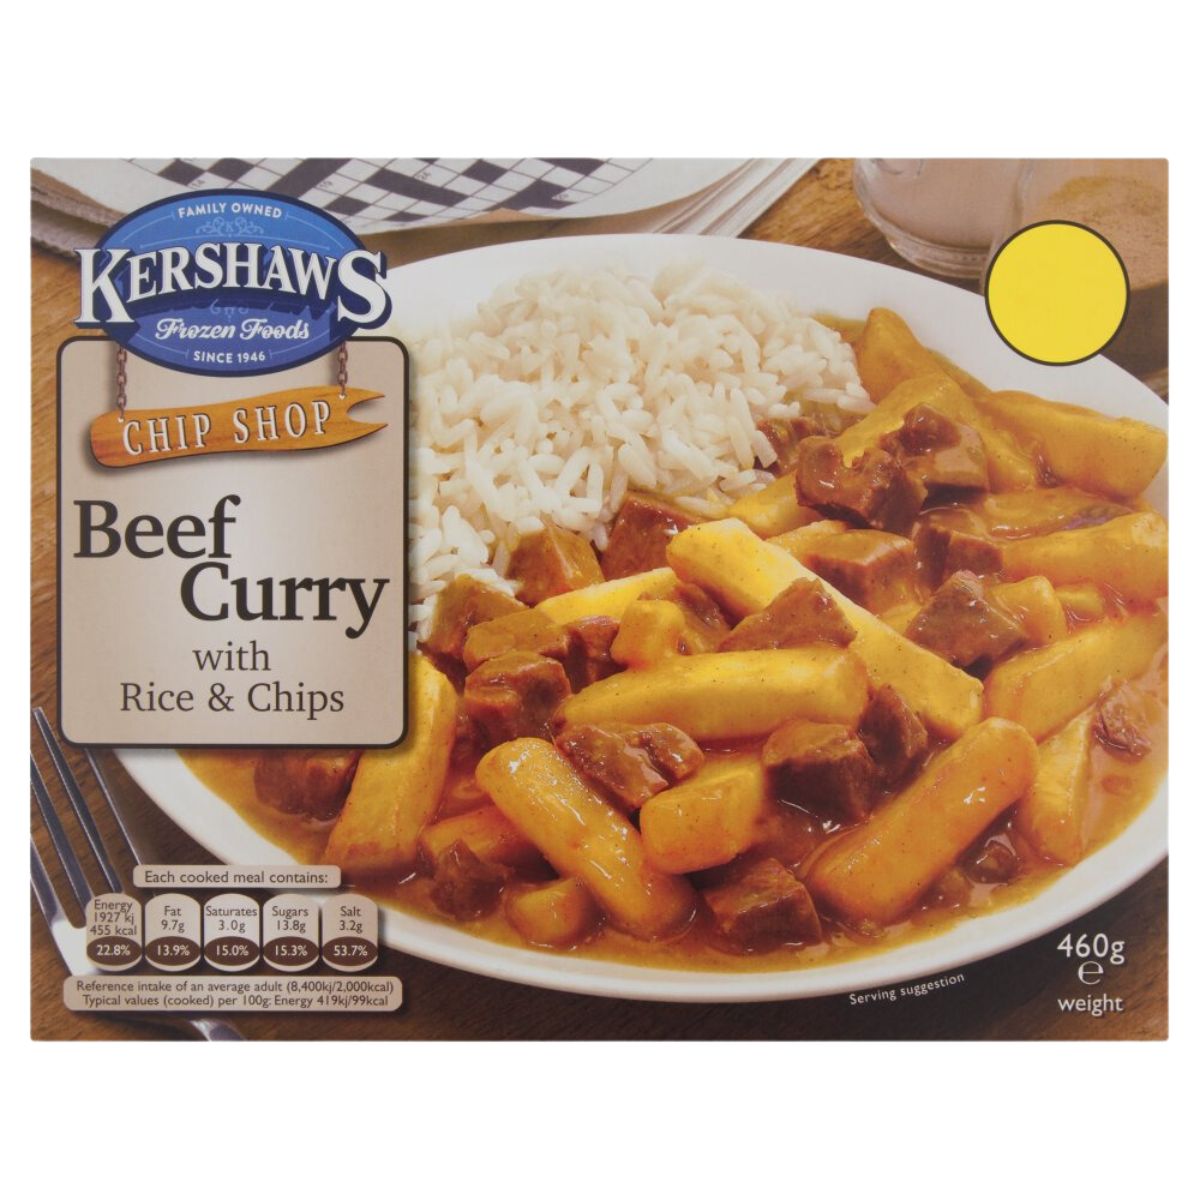 Kershaw's Kershaws - Chip Shop Beef Curry with Rice & Chips - 460g with rice and chips.